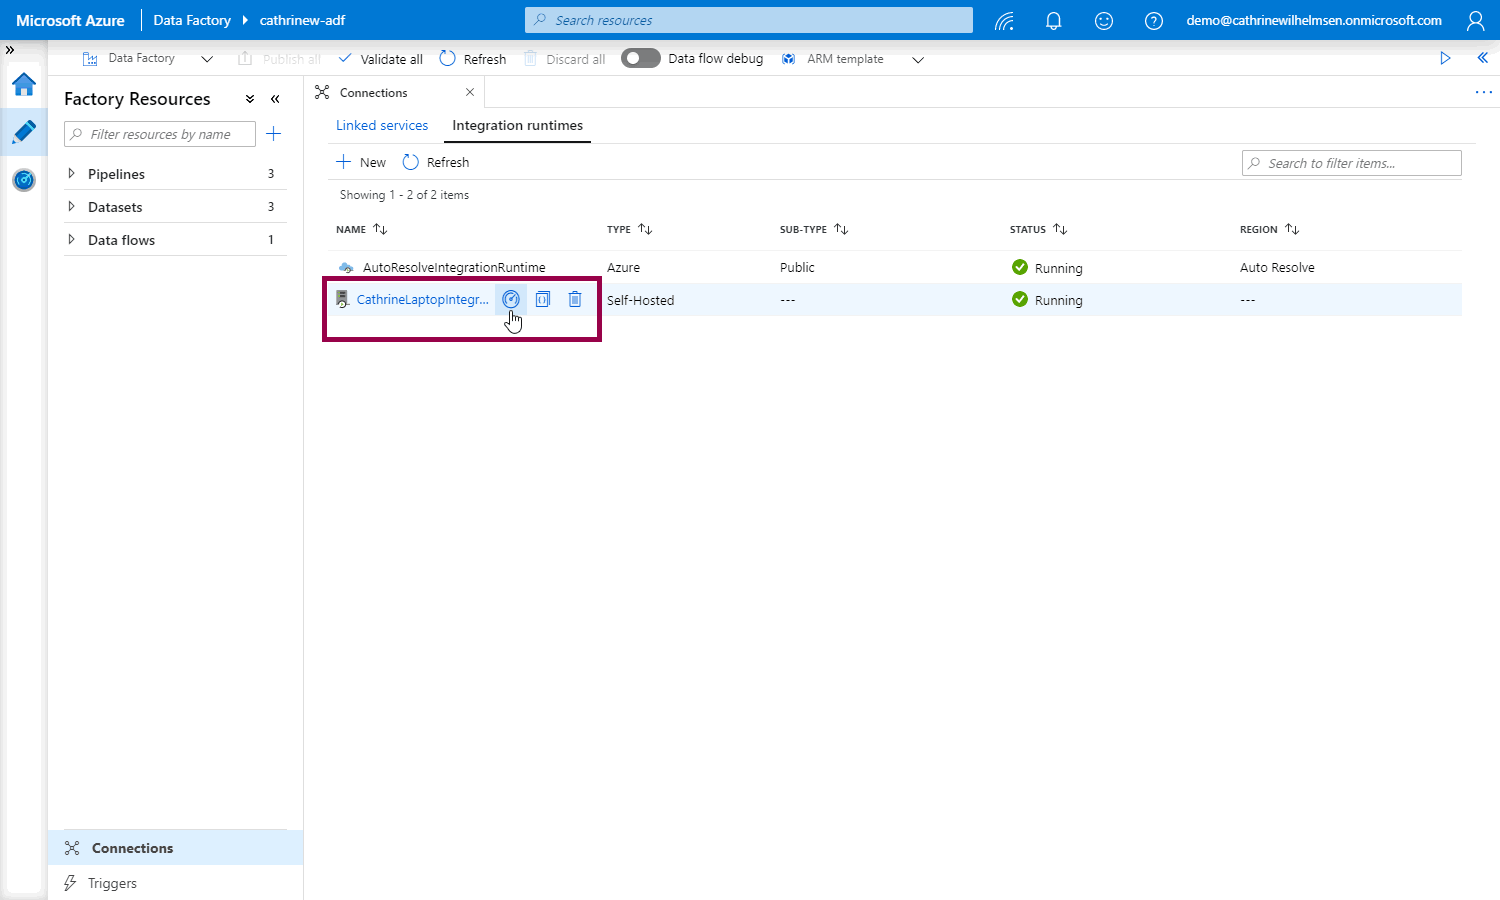 Screenshot of the Azure Data Factory interface with the integration runtimes open, highlighting the monitor integration runtime button